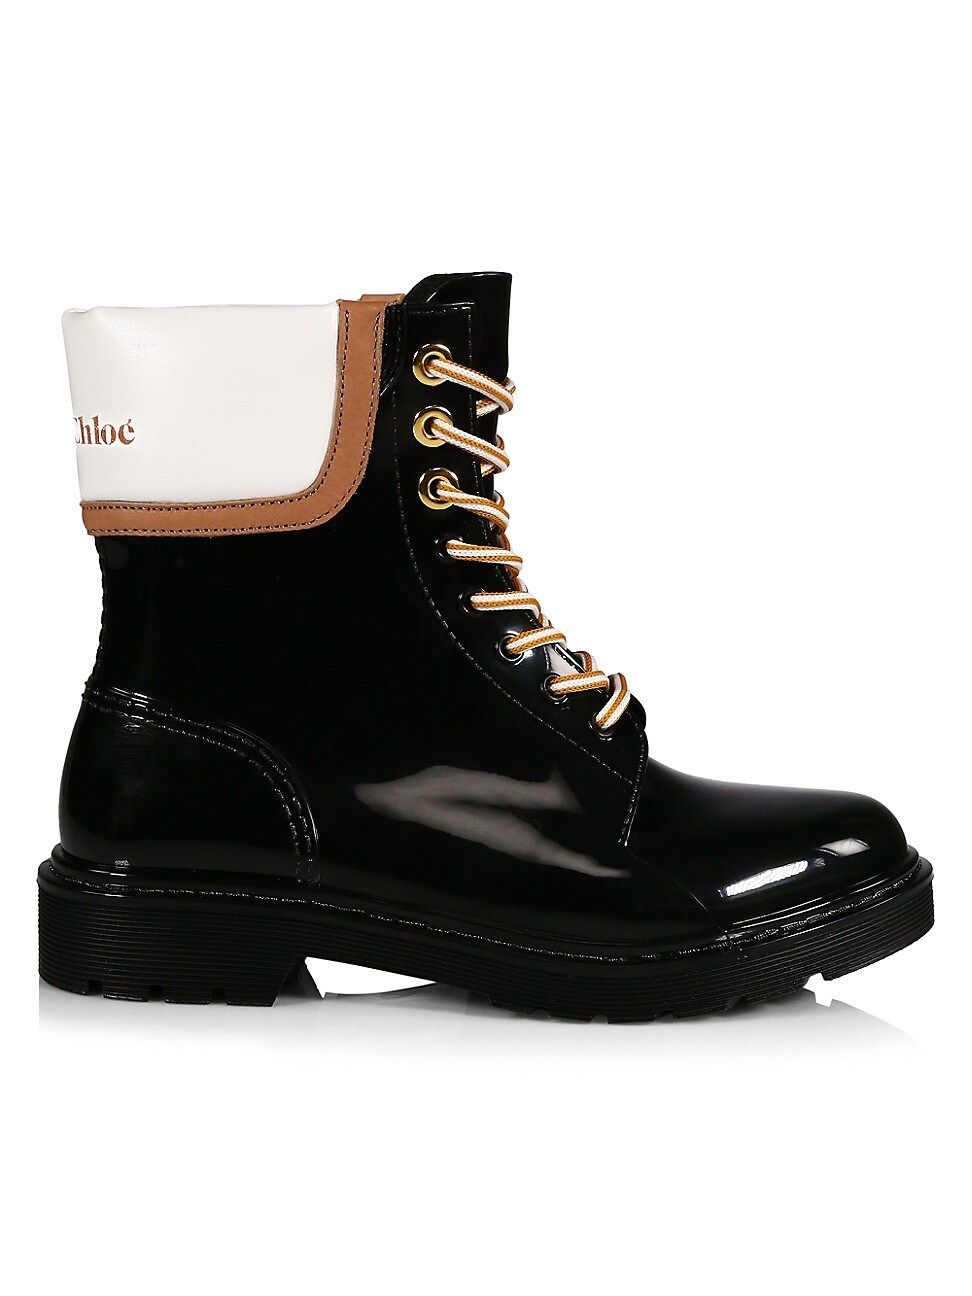 See by Chloé Florrie Lace-Up Rain Boots | Saks Fifth Avenue